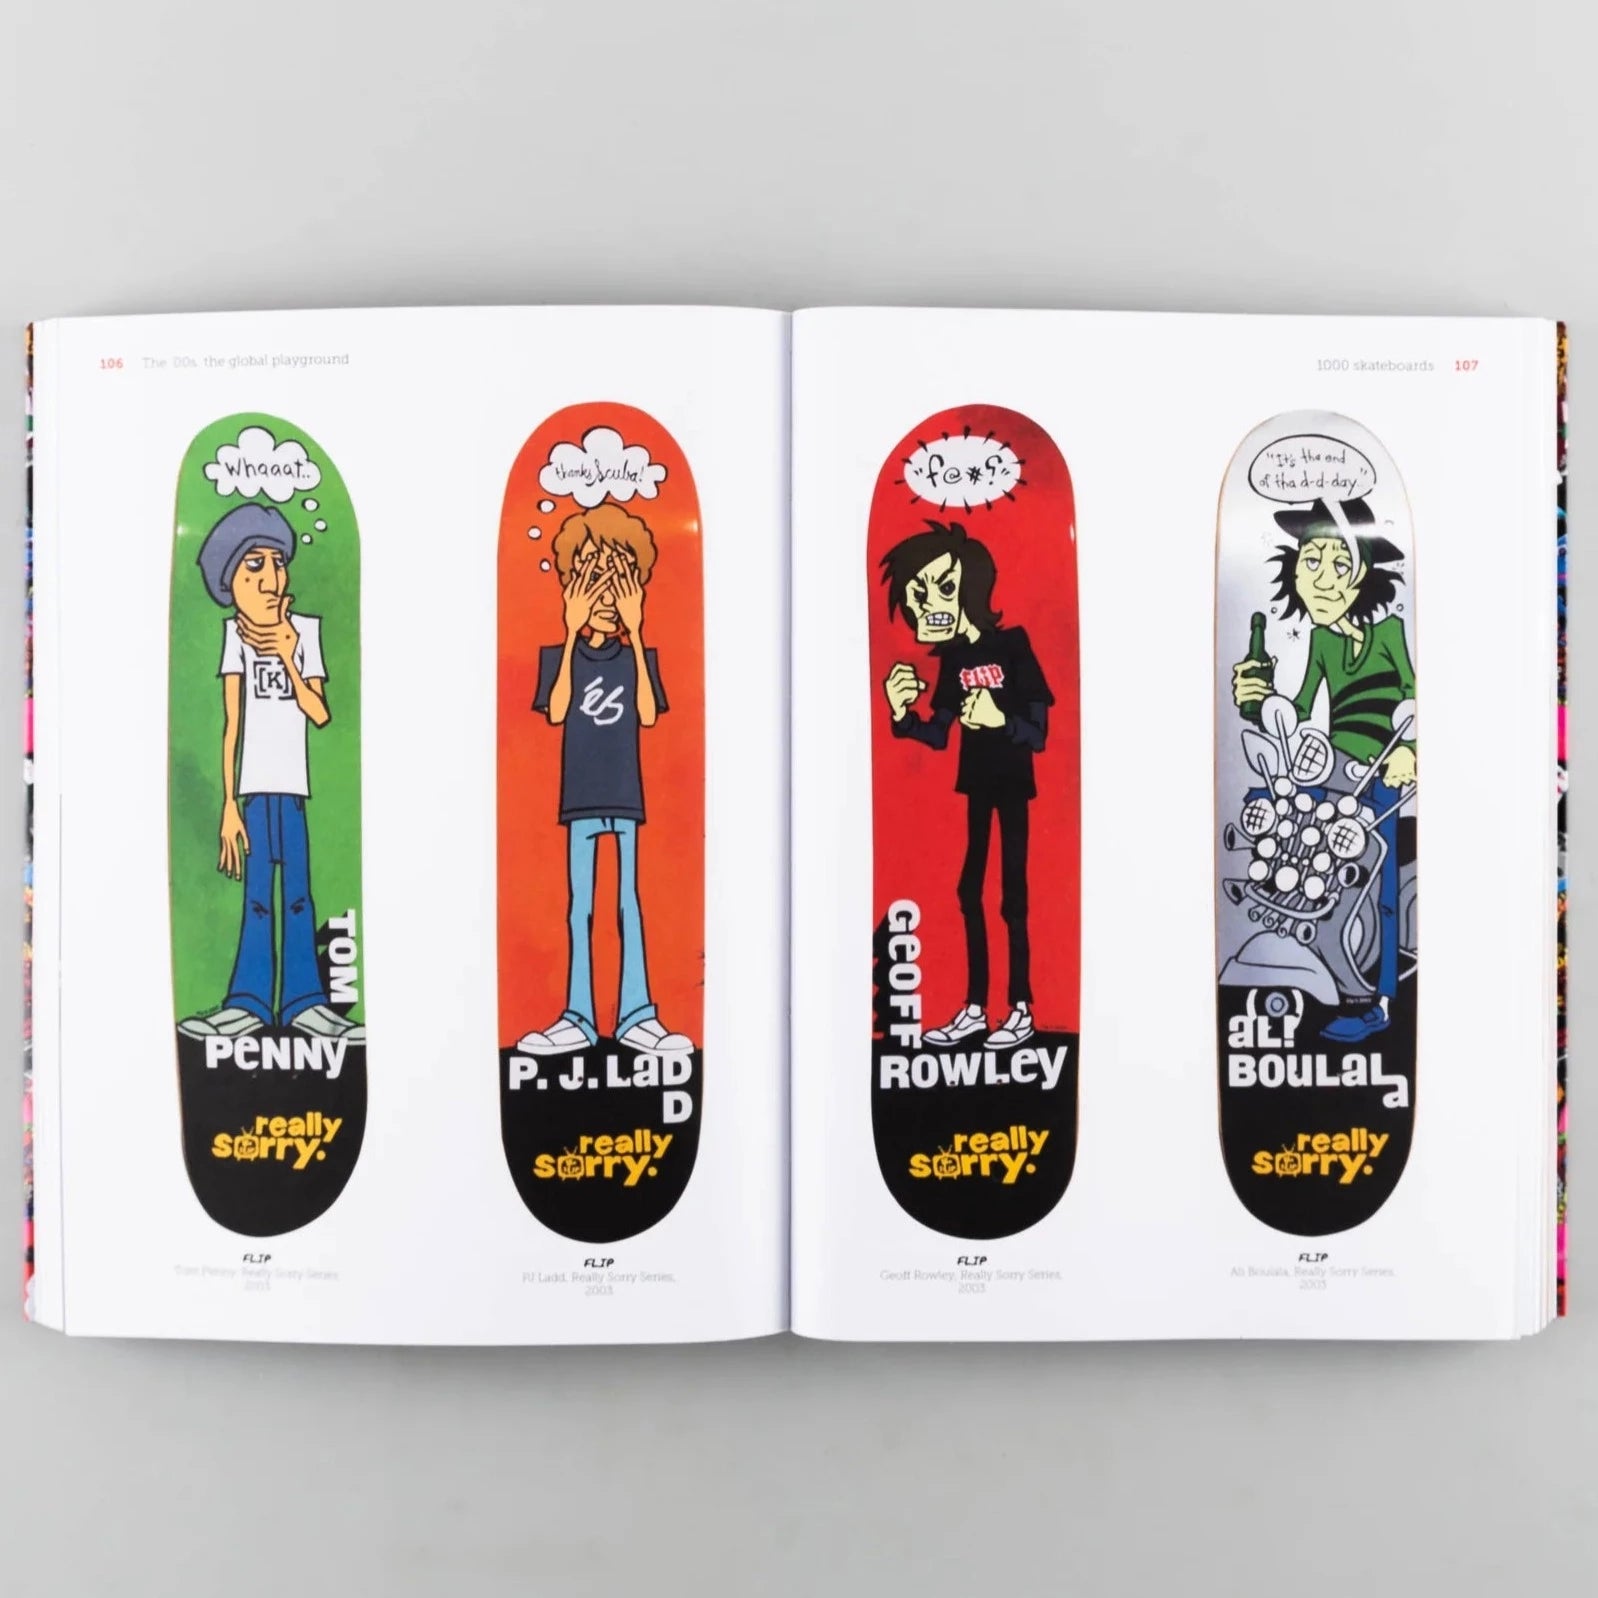 inside pages of a book showing pictures of skateboards